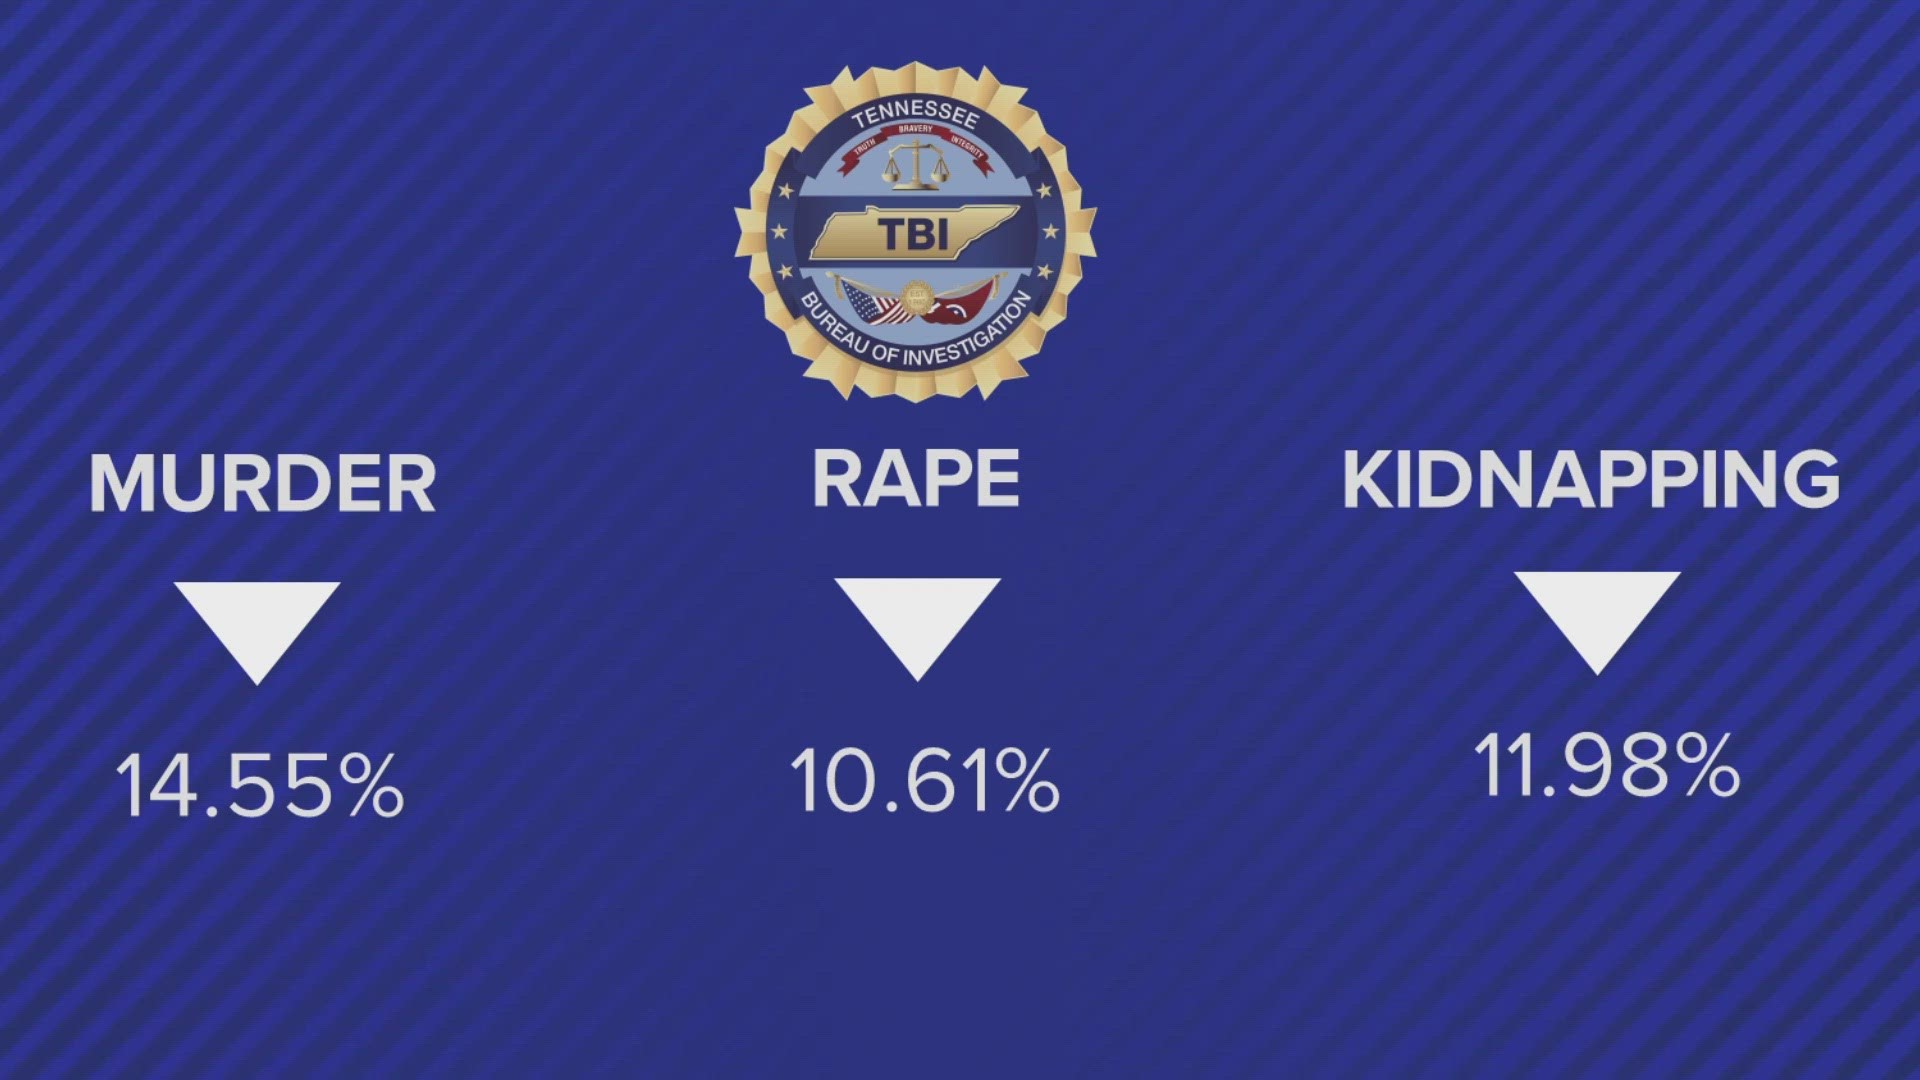 The latest Crime in Tennessee report showed reports of dangerous crimes such as murder, rape and kidnapping decreased by more than 10% in 2022.